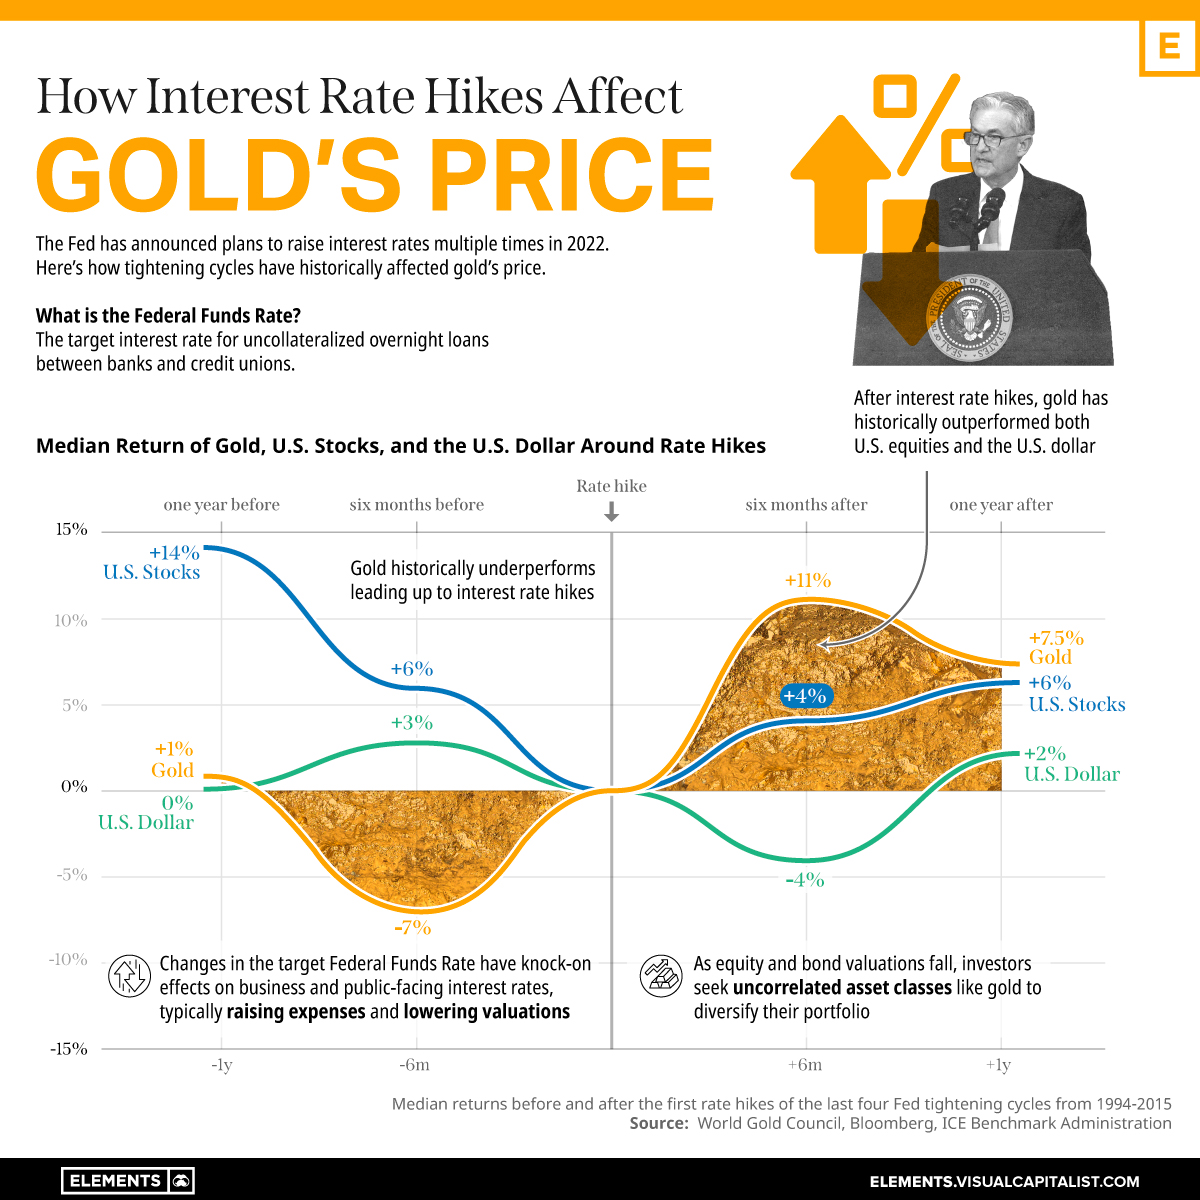 How-Interest-Rates-Affect-Golds-Price-2.jpg